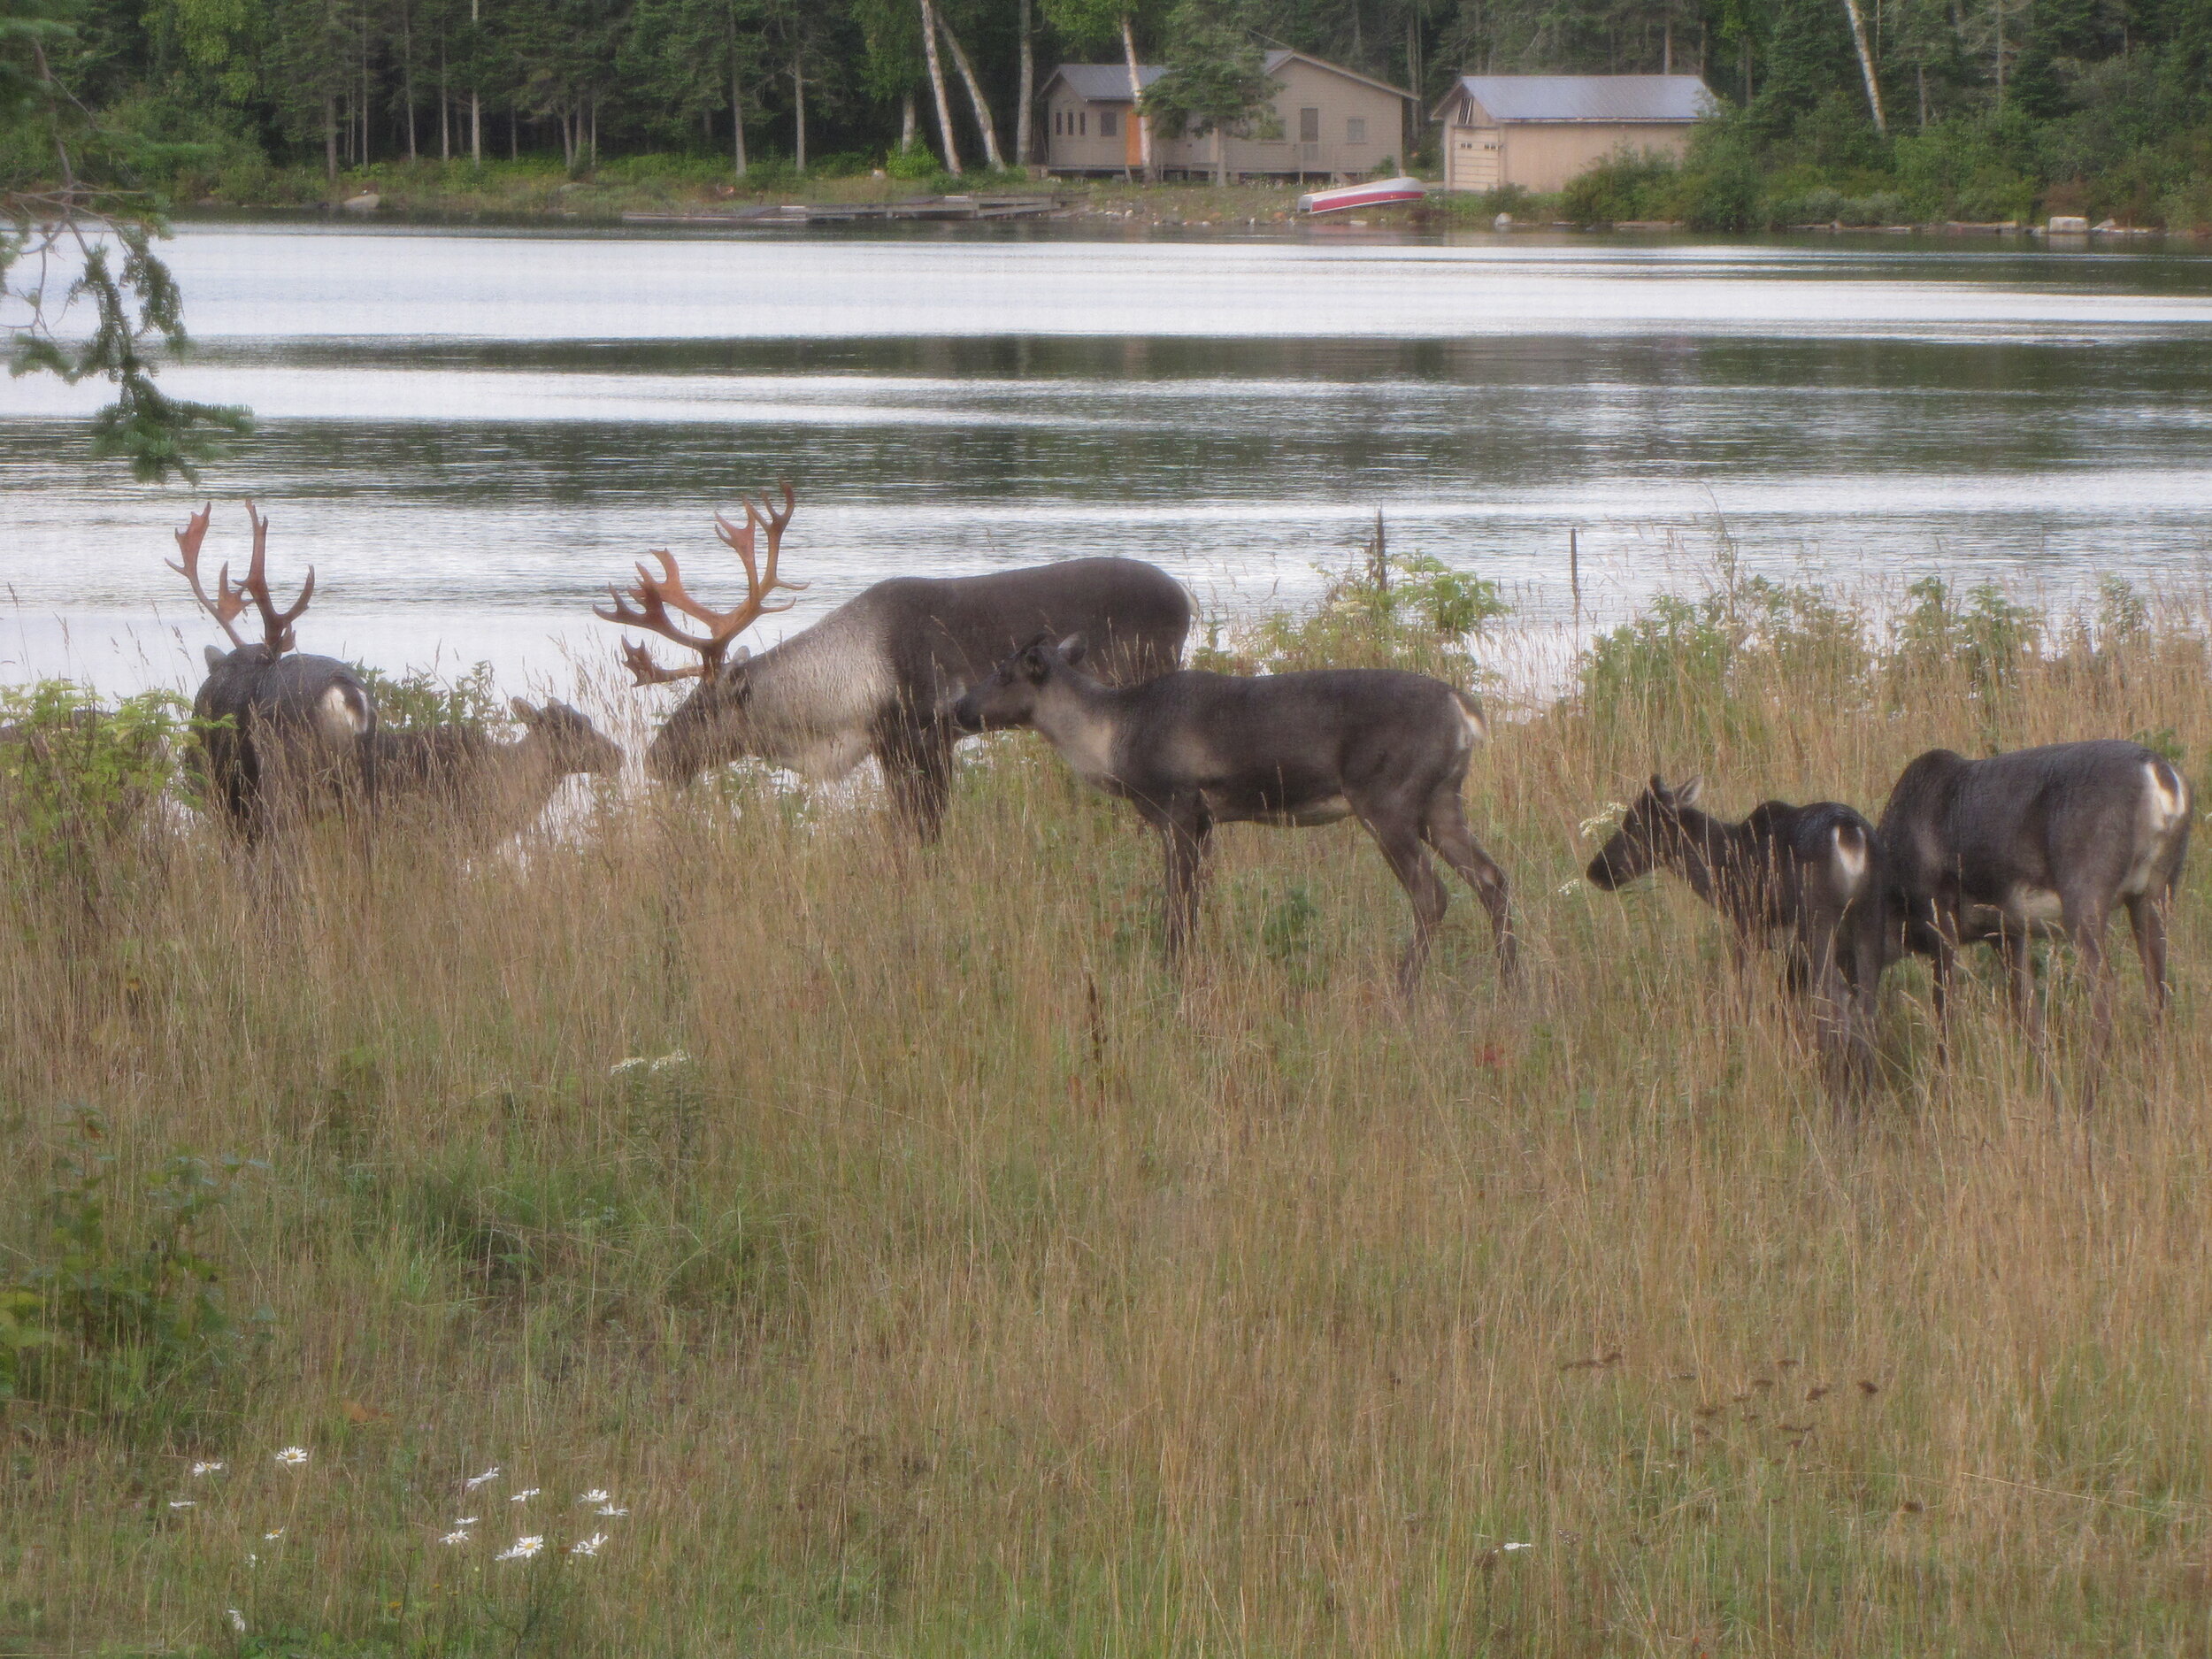 Six caribou near the edge of water with a house visible in the background